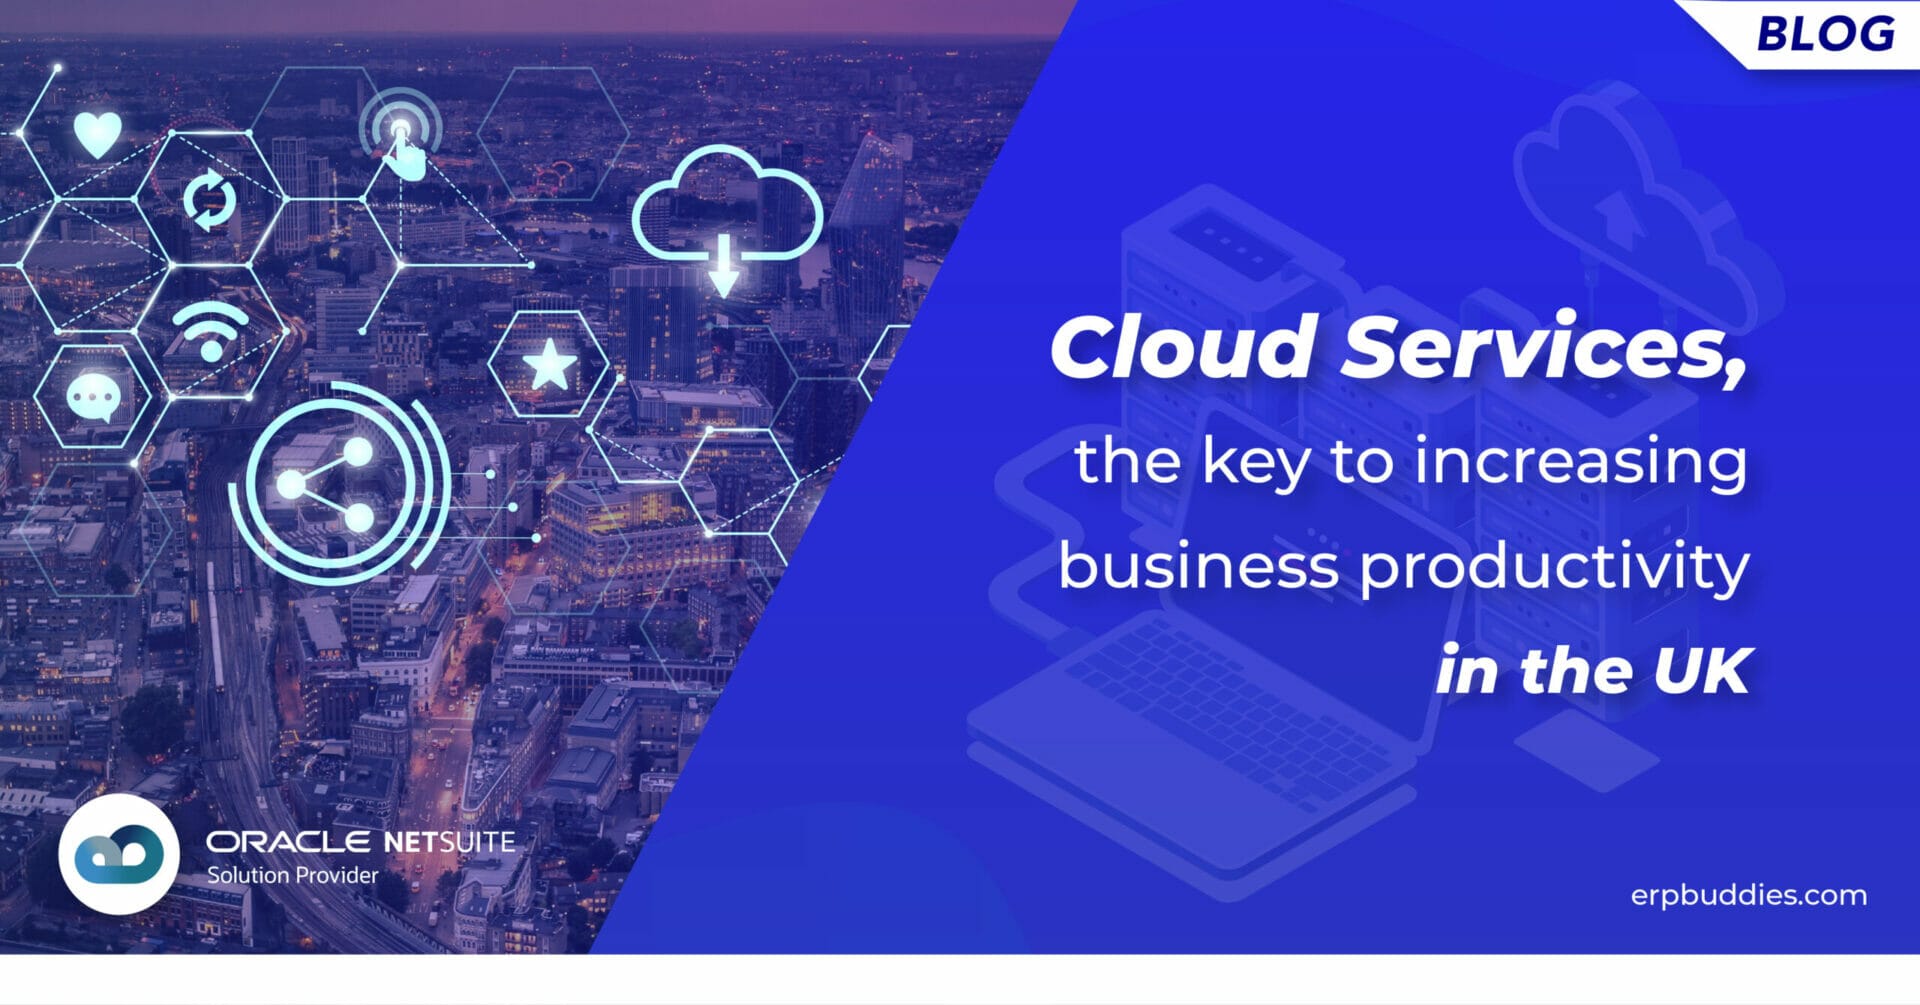 Cloud Services are the key to modernizing and increasing business productivity in the UK